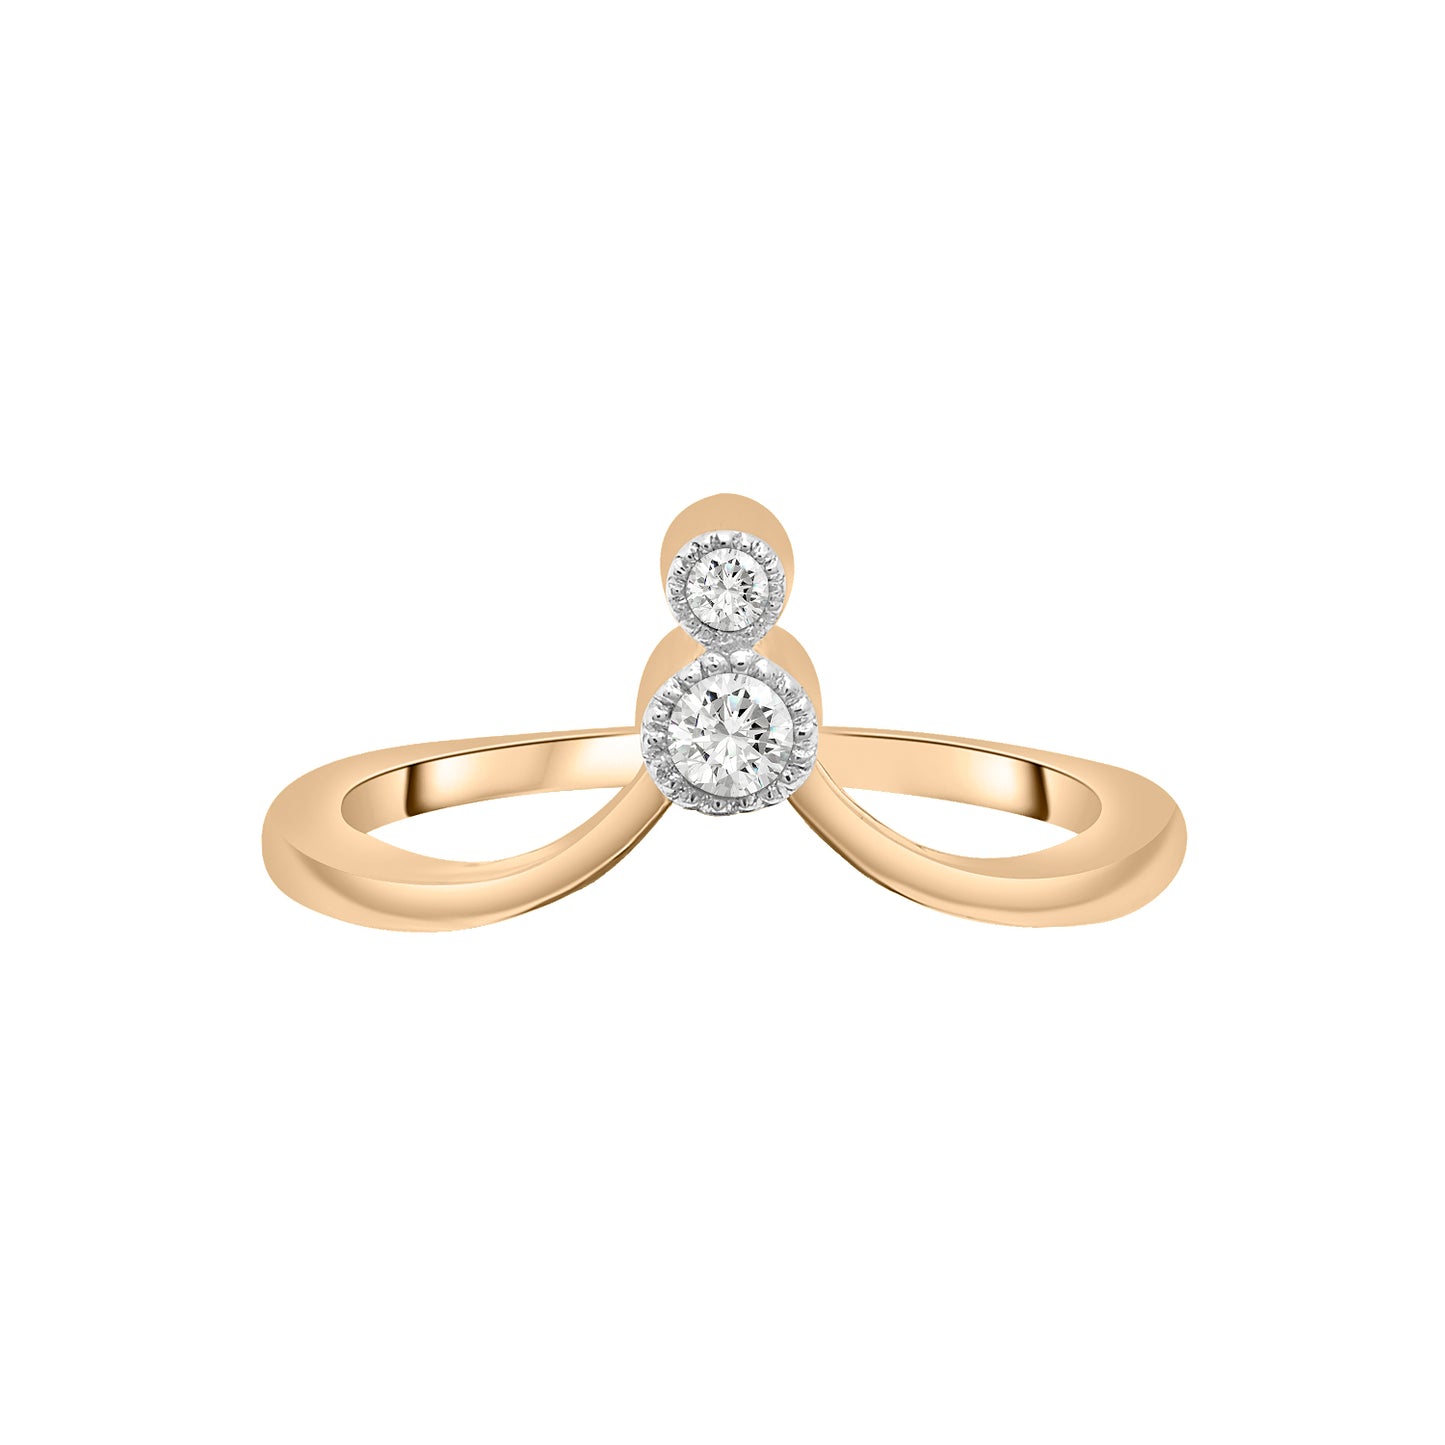 Heluviee Arched Diamond Ring